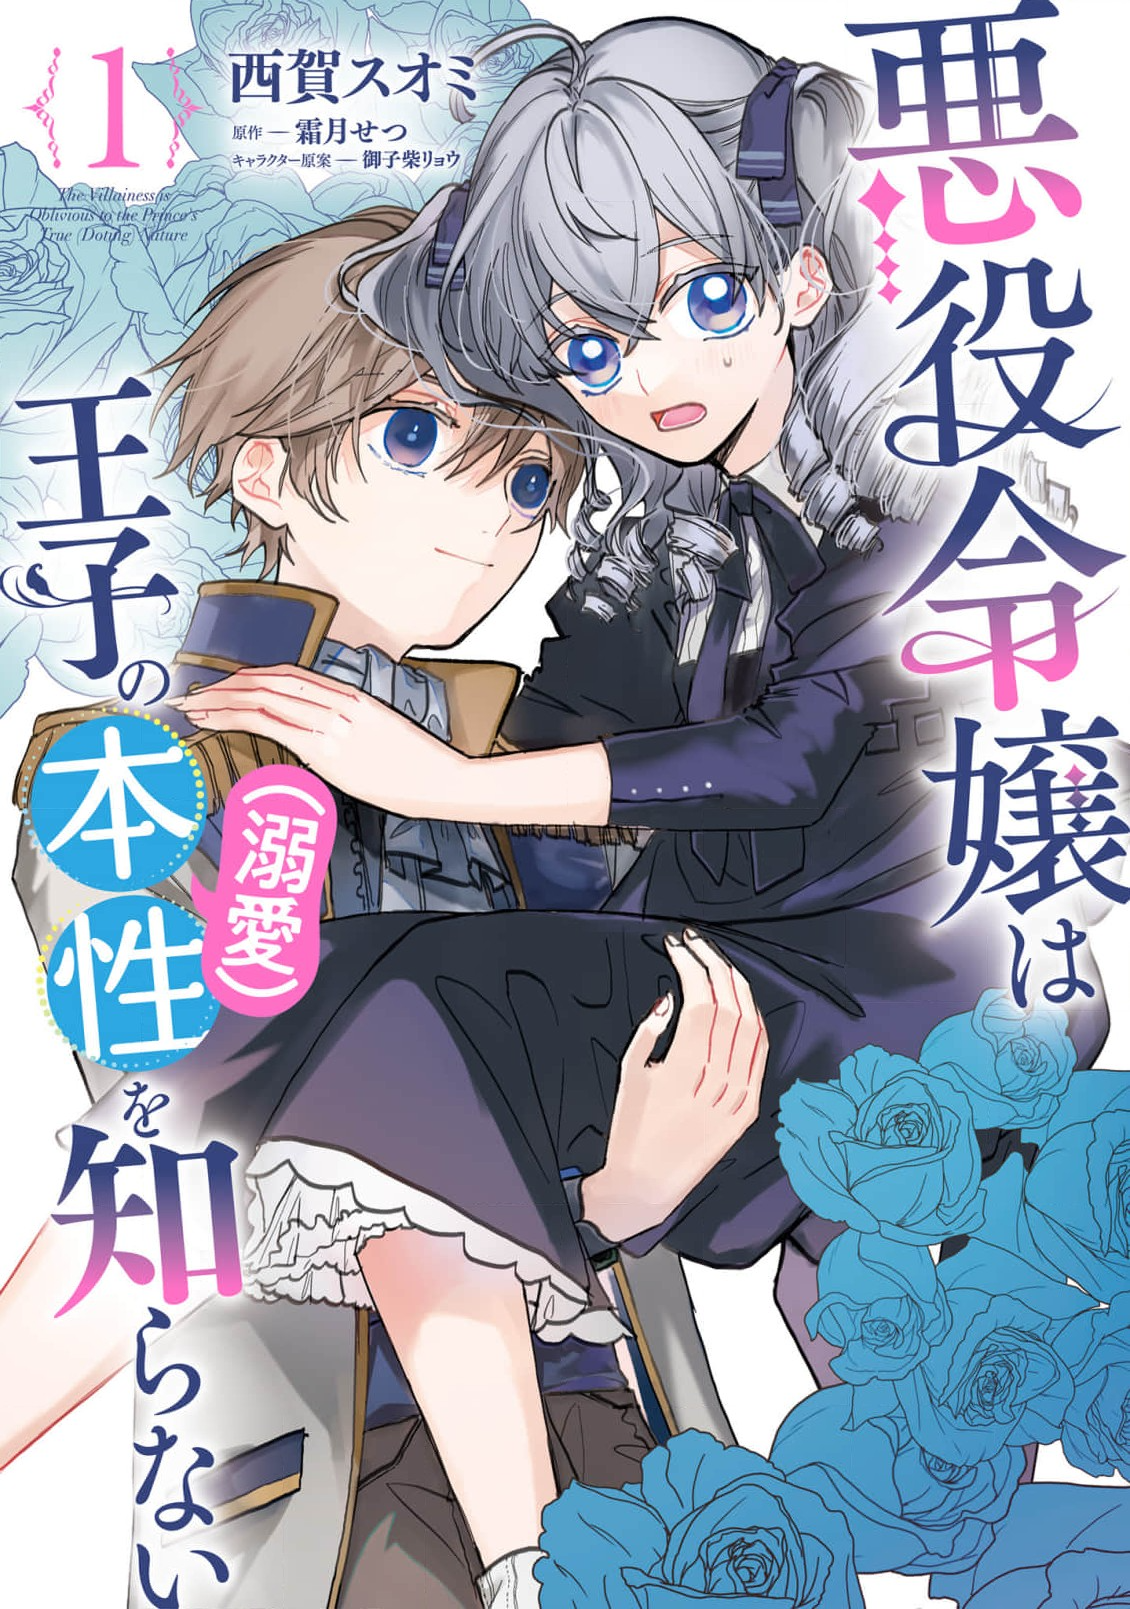 Image For Post | Isekai, reincarnation, romcom of a Yandere Prince × super insensitive villainess daughter!

In a meeting with Prince Dylan, Belltier suddenly recalls her previous life and realizes that she has been reincarnated as the villainess in an otome game.

In order to avoid the bad ending, just as she thought to distance herself from the Prince, she was chosen as his fiancee.

"Do not let the prince have a sad childhood!”

It's only 5 years until the lonely prince meets the heroine. She is a temporary fiance, but she decides to become a friend and support him until then.

But as we get along smoothly, the skinship of the prince gets intense!?

i love you so much.

𝗢𝘁𝗵𝗲𝗿 𝗹𝗶𝗻𝗸𝘀:
-  https://www.mangaupdates.com/series/dpo291m/akuyaku-reijou-wa-ouji-no-honsou-dekiai-wo-shiranai
___________________________________________________________________
-  https://www.anime-planet.com/manga/akuyaku-reijou-wa-ouji-no-honsou-dekiai-wo-shiranai - [Purple Eyes ](https://hero.page/lostteen/purple-eyes-female-mc-comic)